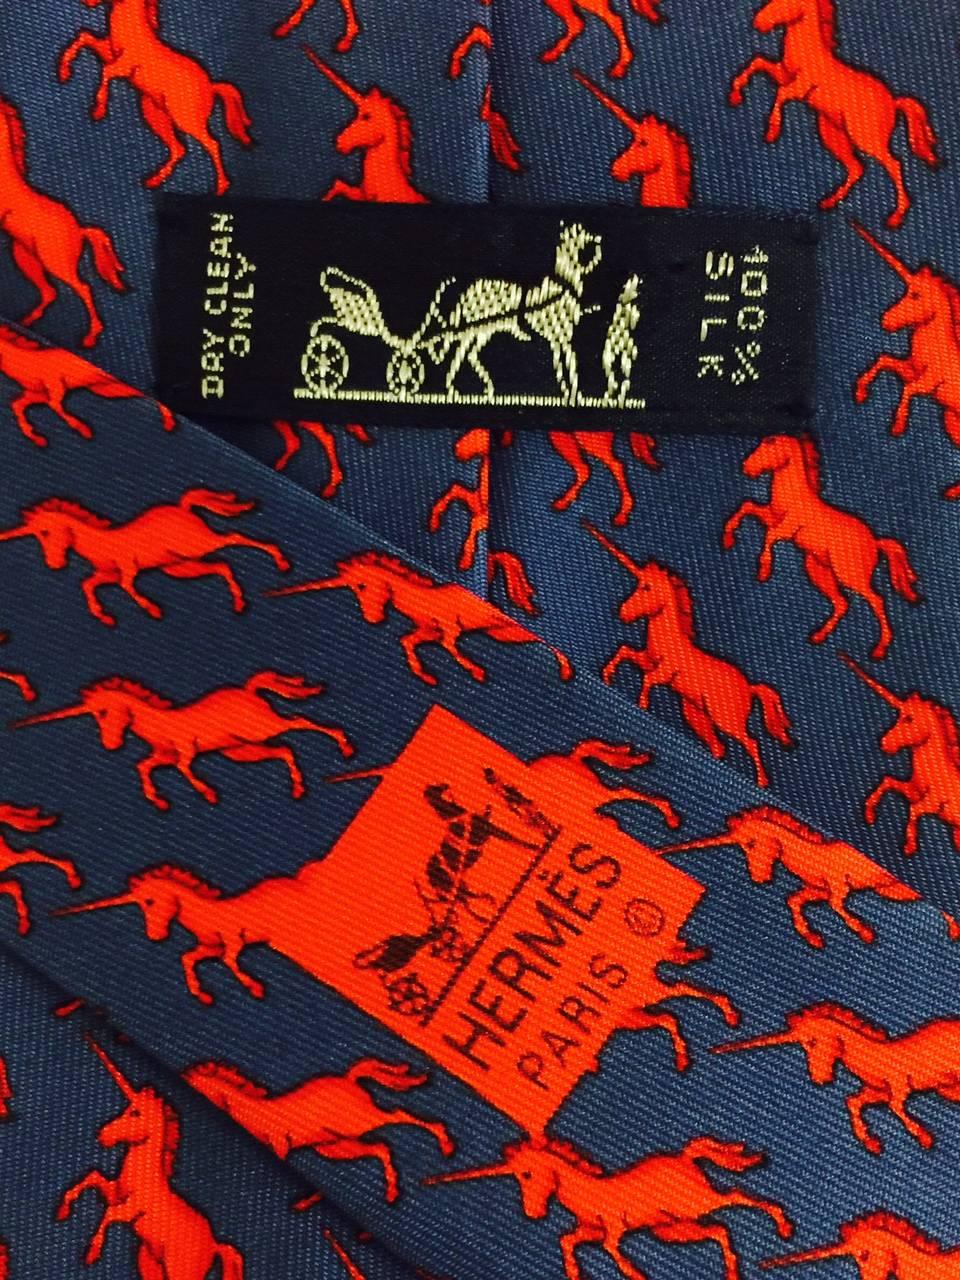 Fun Hermes neck tie in indigo blue with shaded red unicorns prancing along.  Lovingly made in the 1980's, a collectible item.